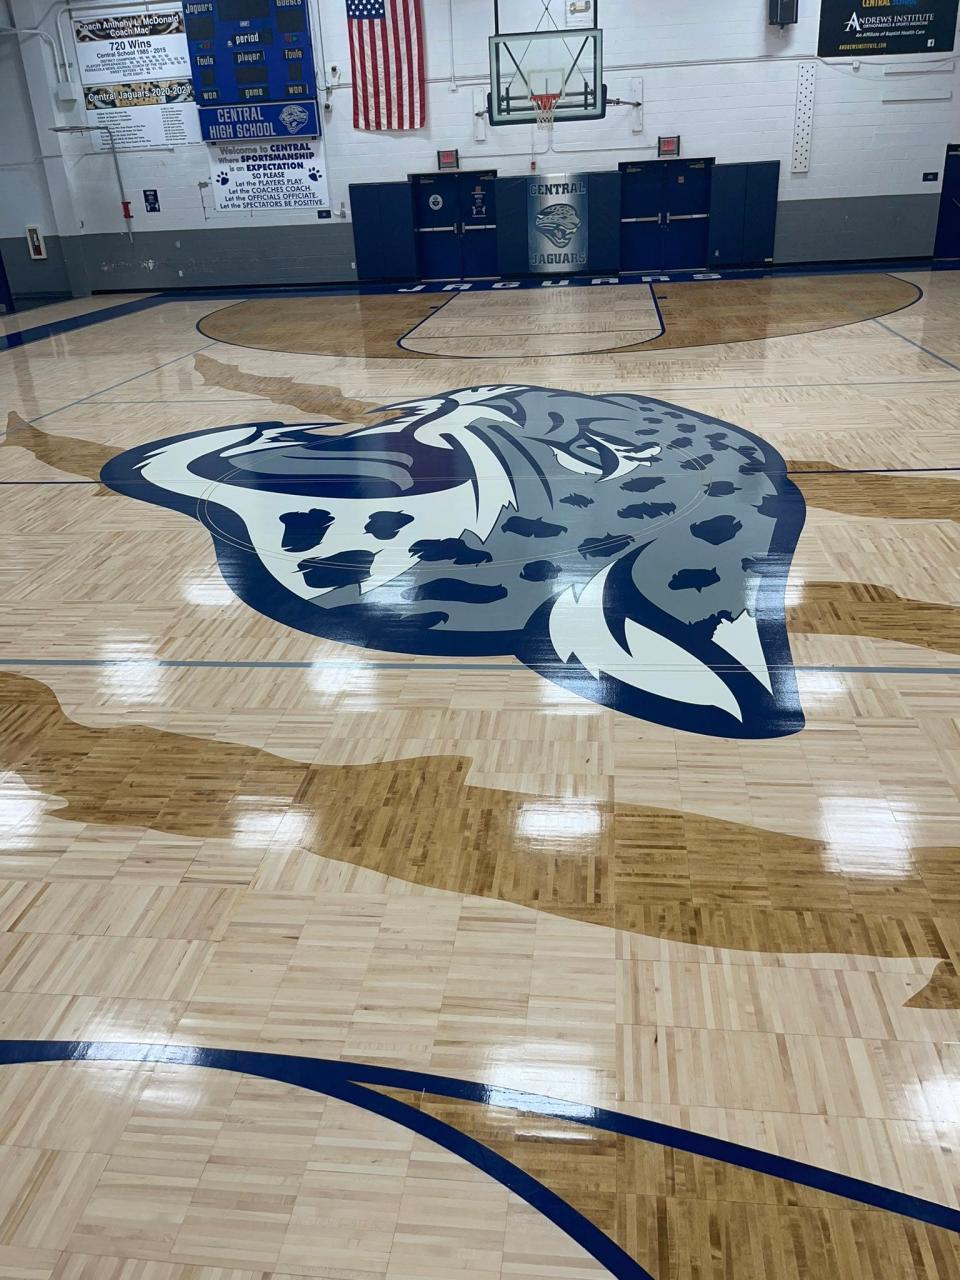 Central High School in Milton had their gym floor redone during the summer.